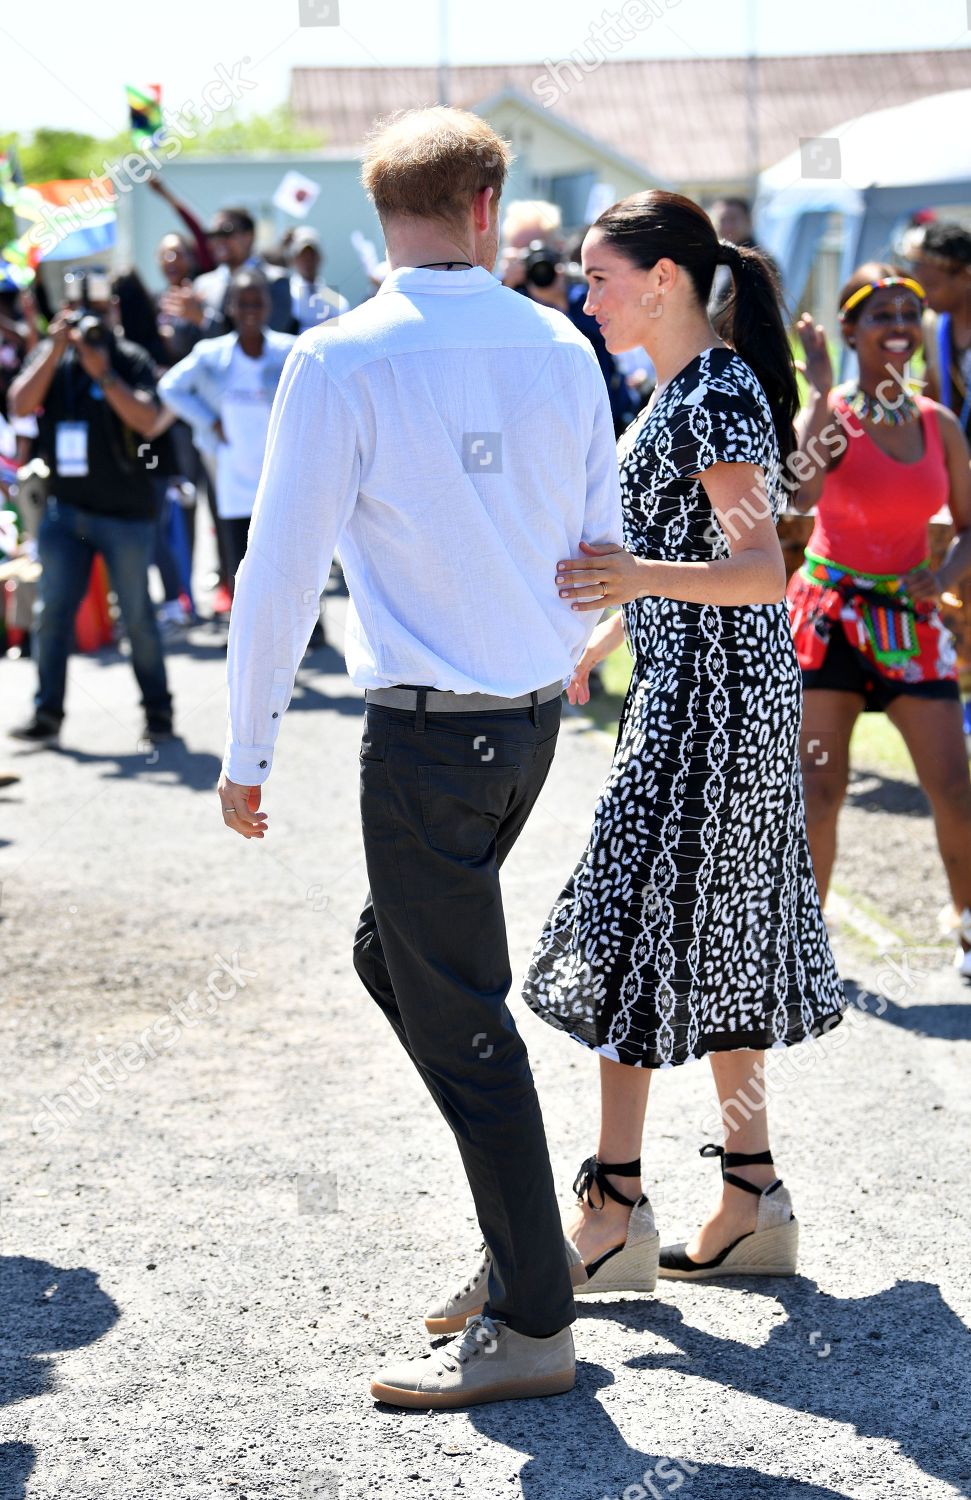 prince-harry-and-meghan-duchess-of-sussex-visit-to-africa-shutterstock-editorial-10421470d.jpg